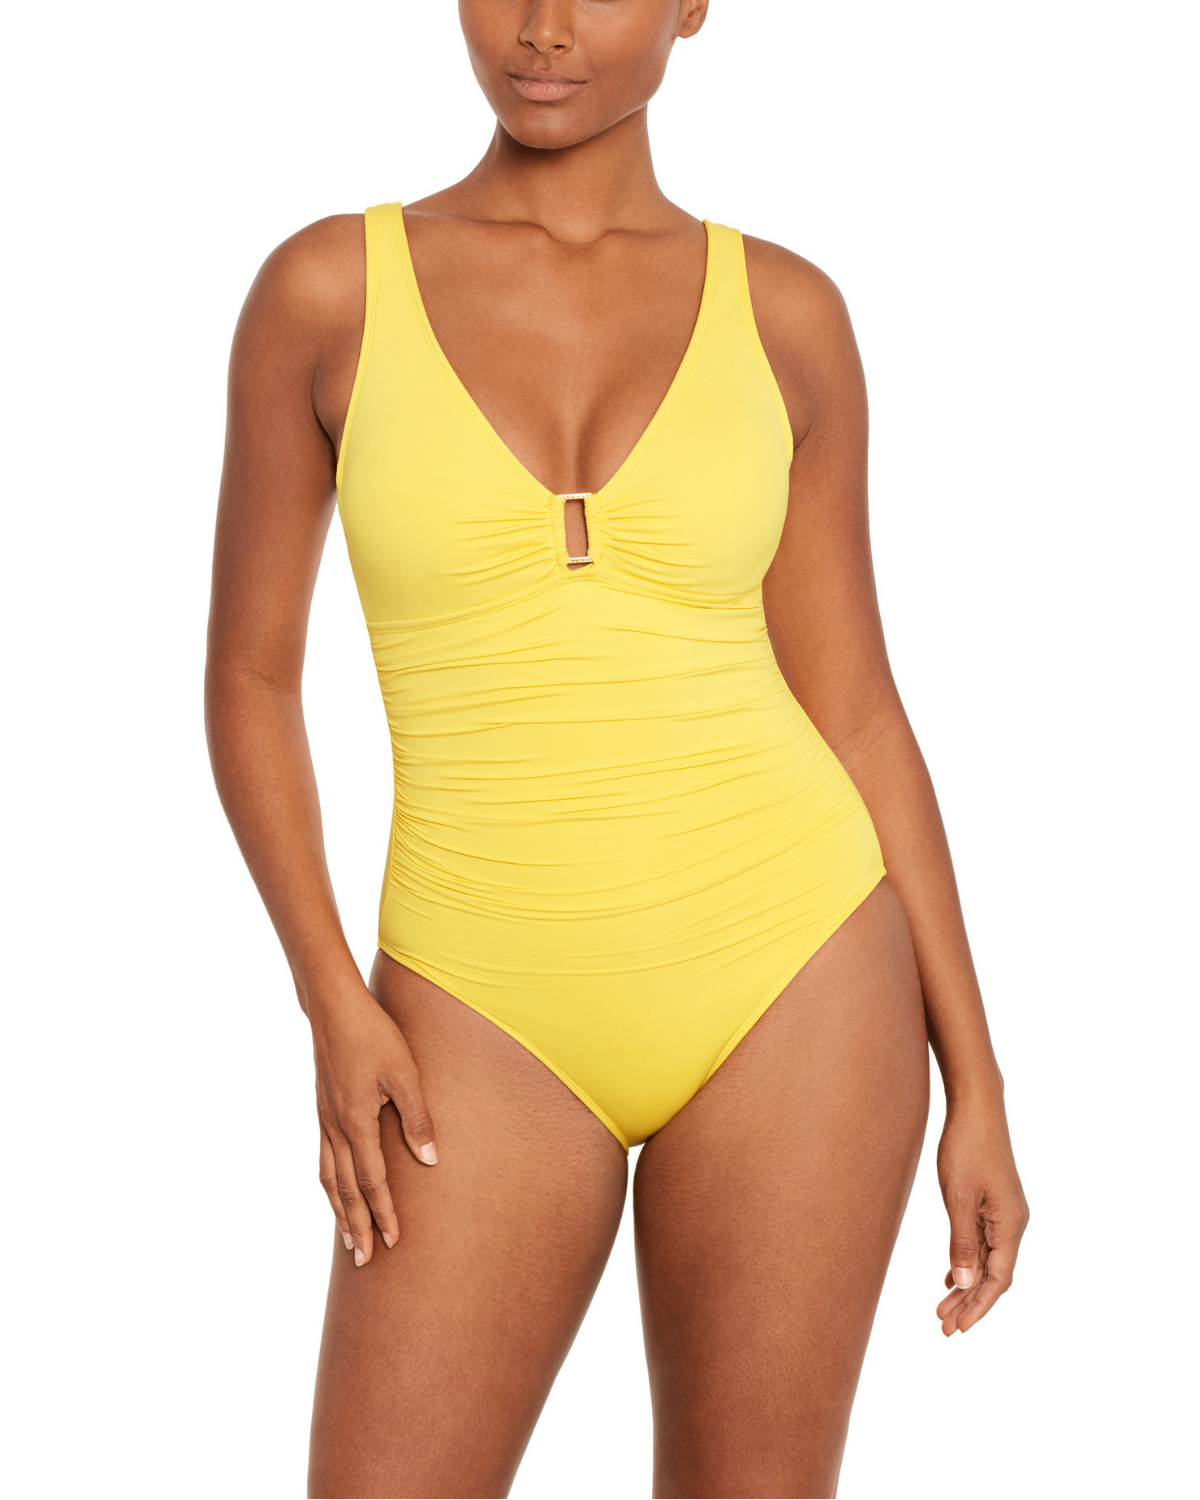 Women's Ruffle Swimsuit Top MORE COLORS -  Canada